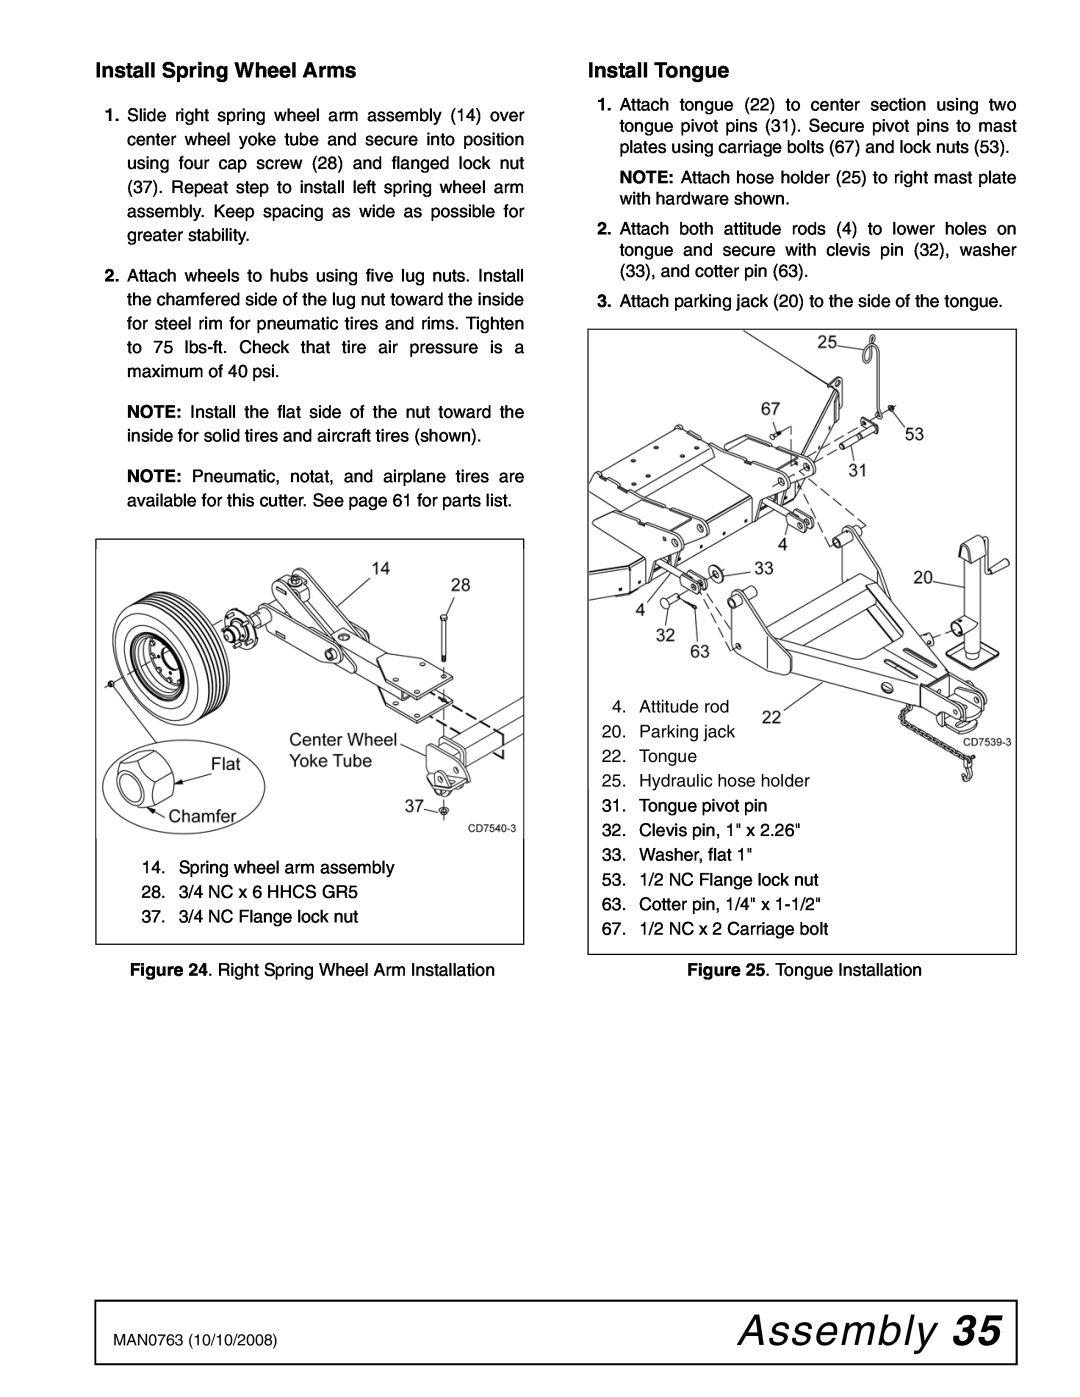 Woods Equipment BW240HDQ manual Assembly, Install Spring Wheel Arms, Install Tongue 